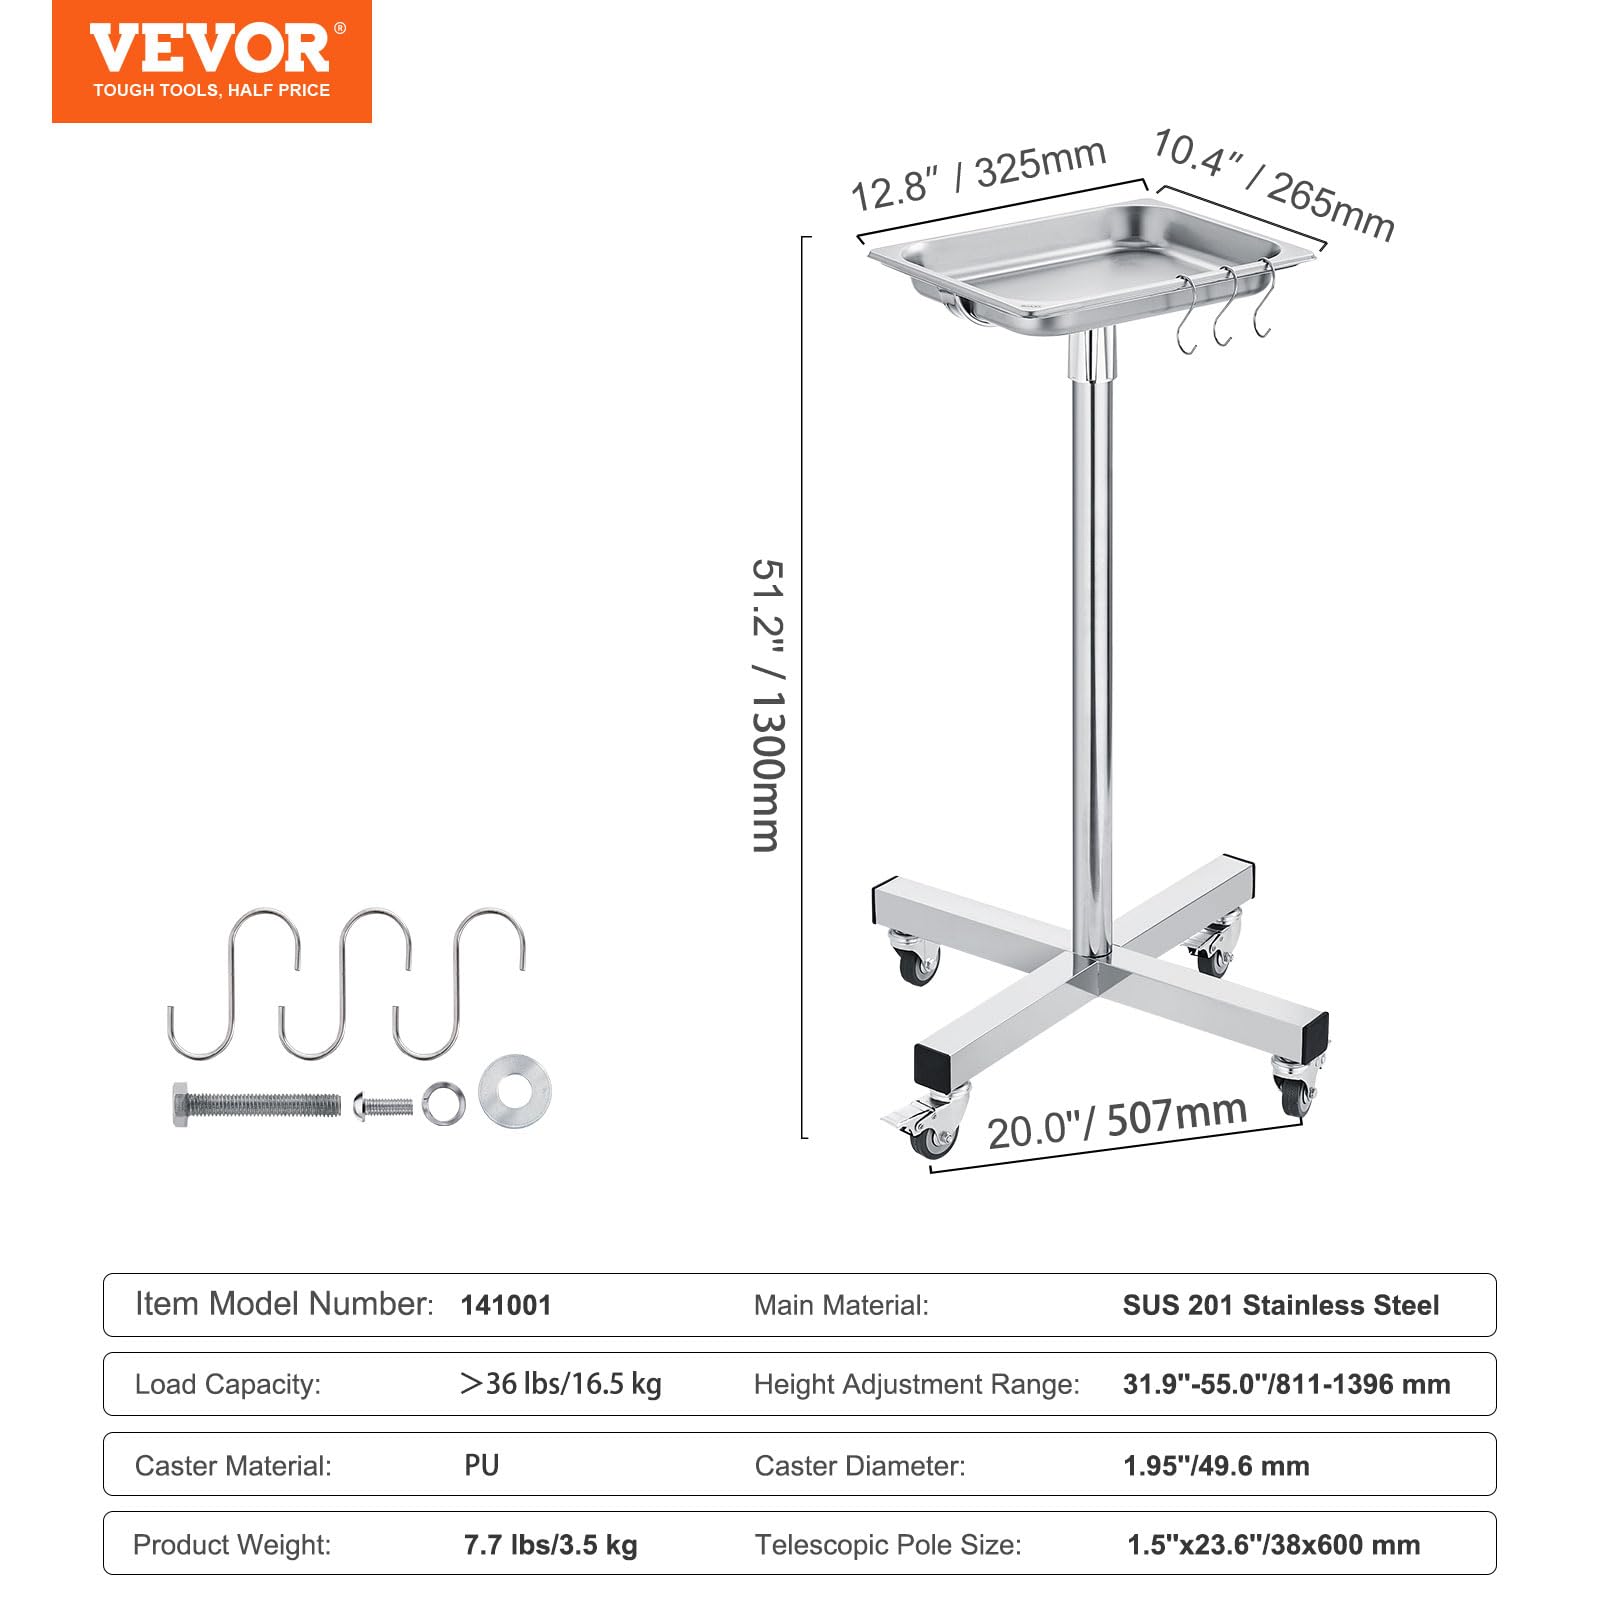 VEVOR Mayo Stand, Stainless Steel Mayo Tray, Load Capacity up to 36 lbs, Adjustable Height 31.9